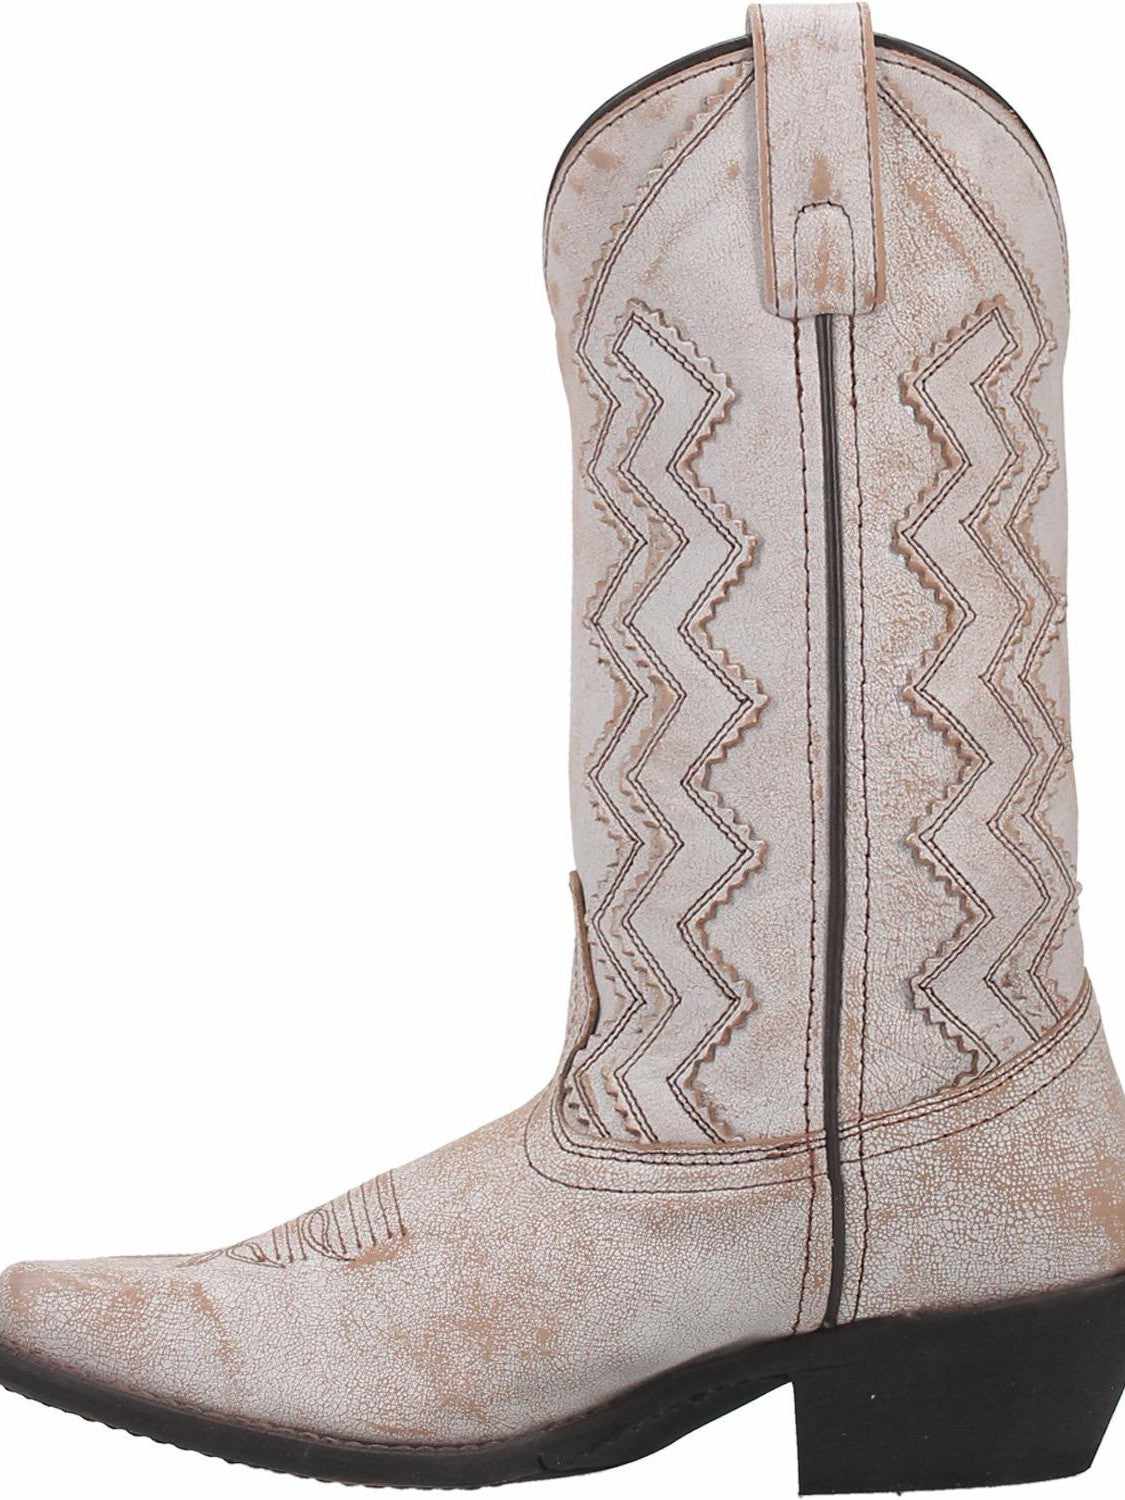 Audrey Square Toe Boot by Laredo